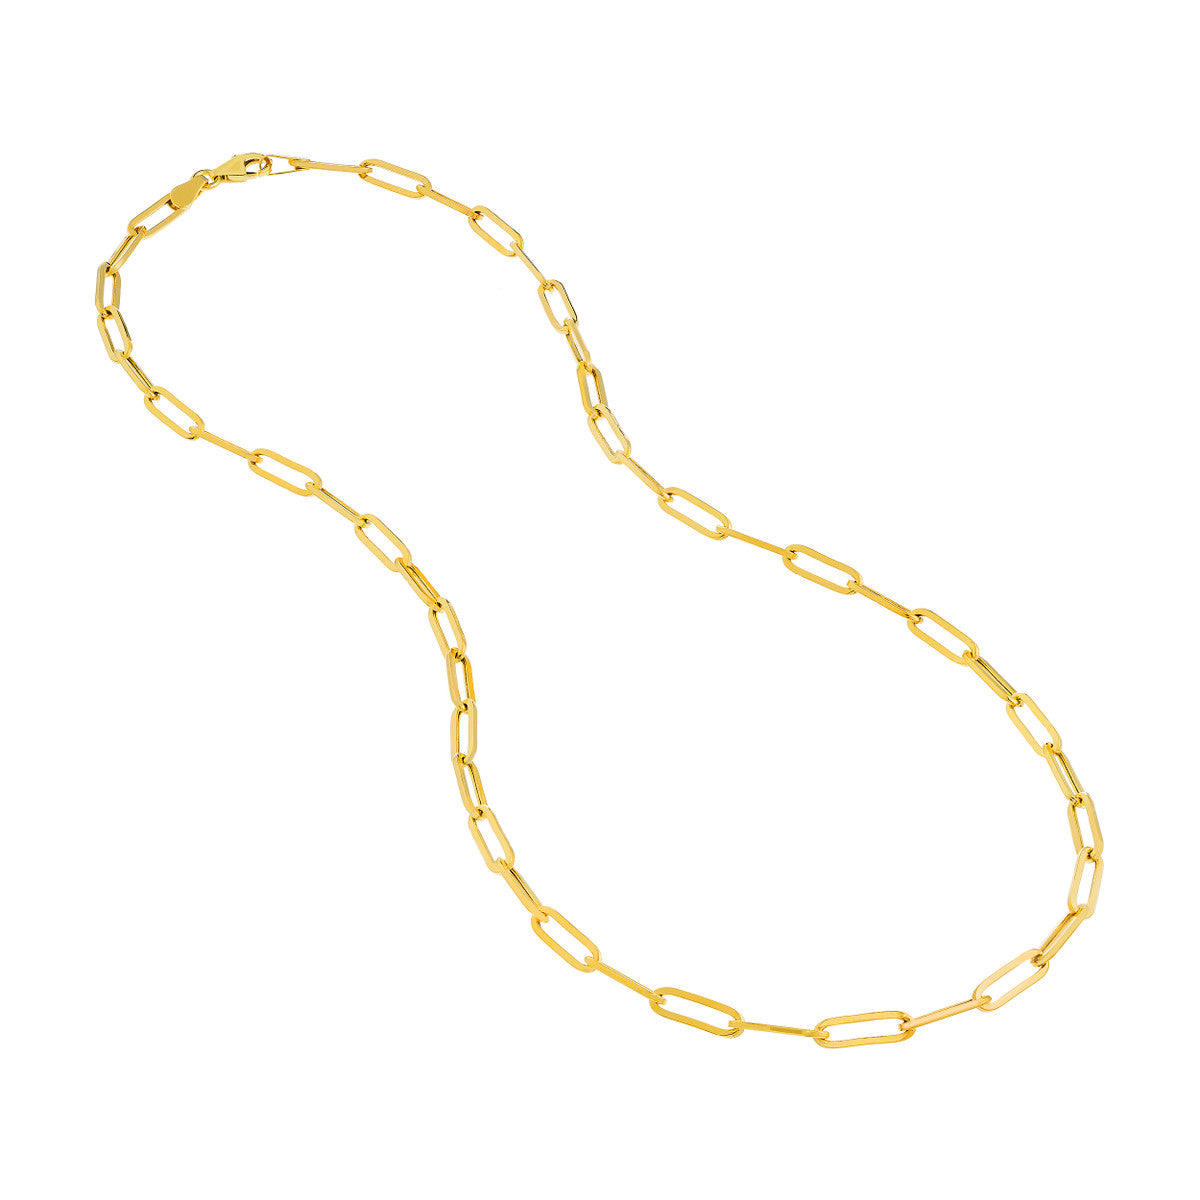 A gold necklace with a long chain on a white background